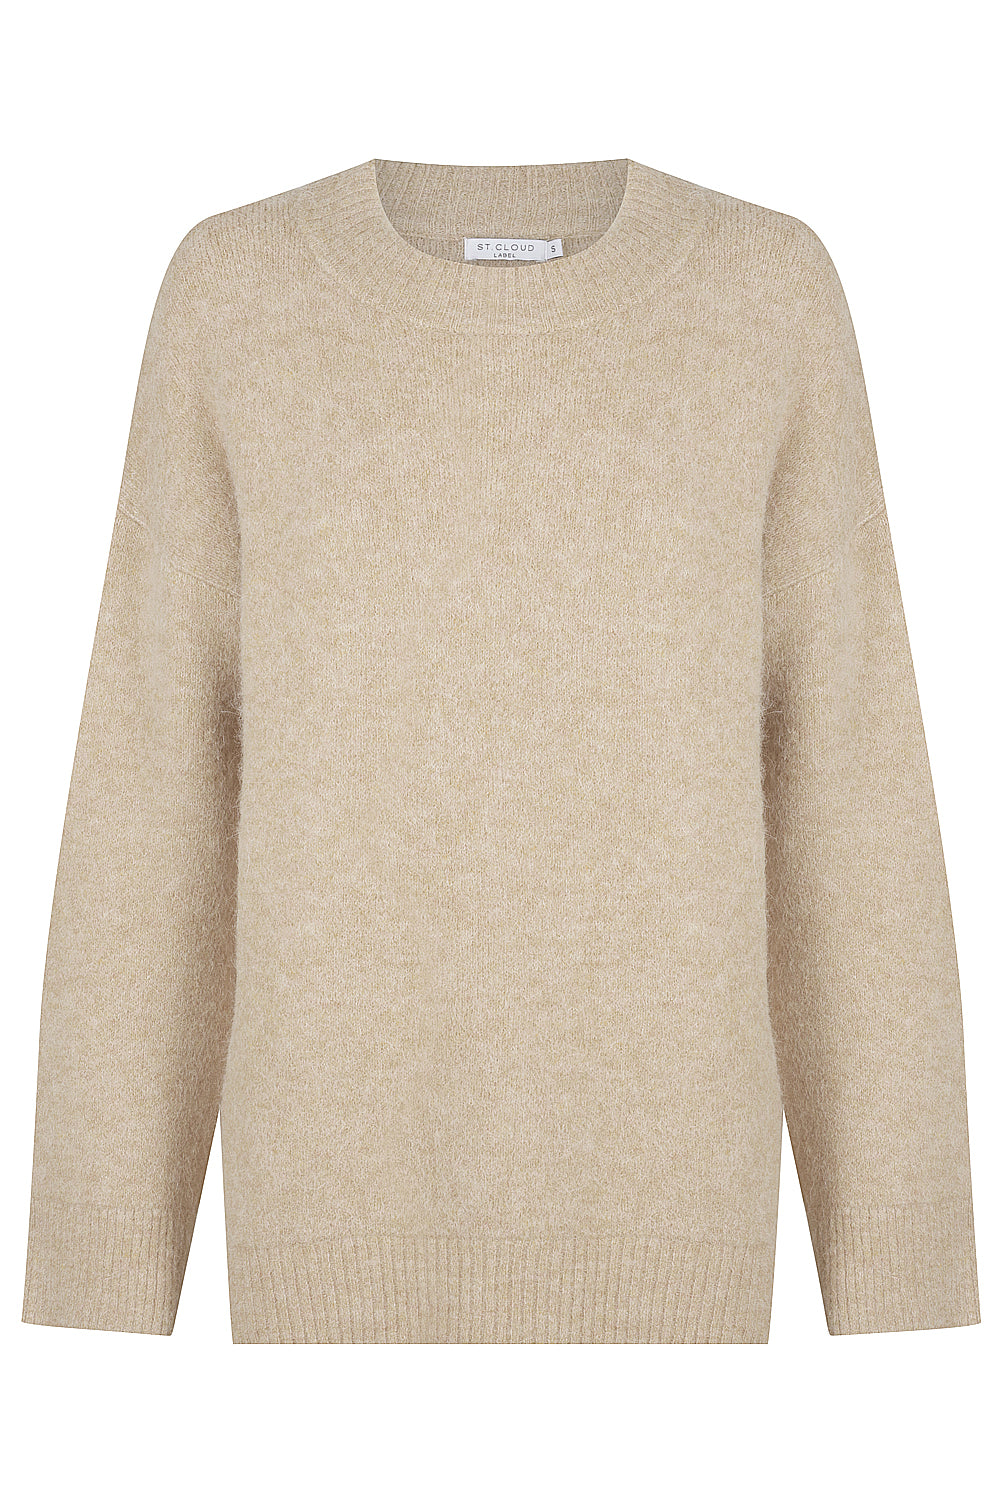 Kick Up Your Heels Cosy Knit Crew - Creme Brulee